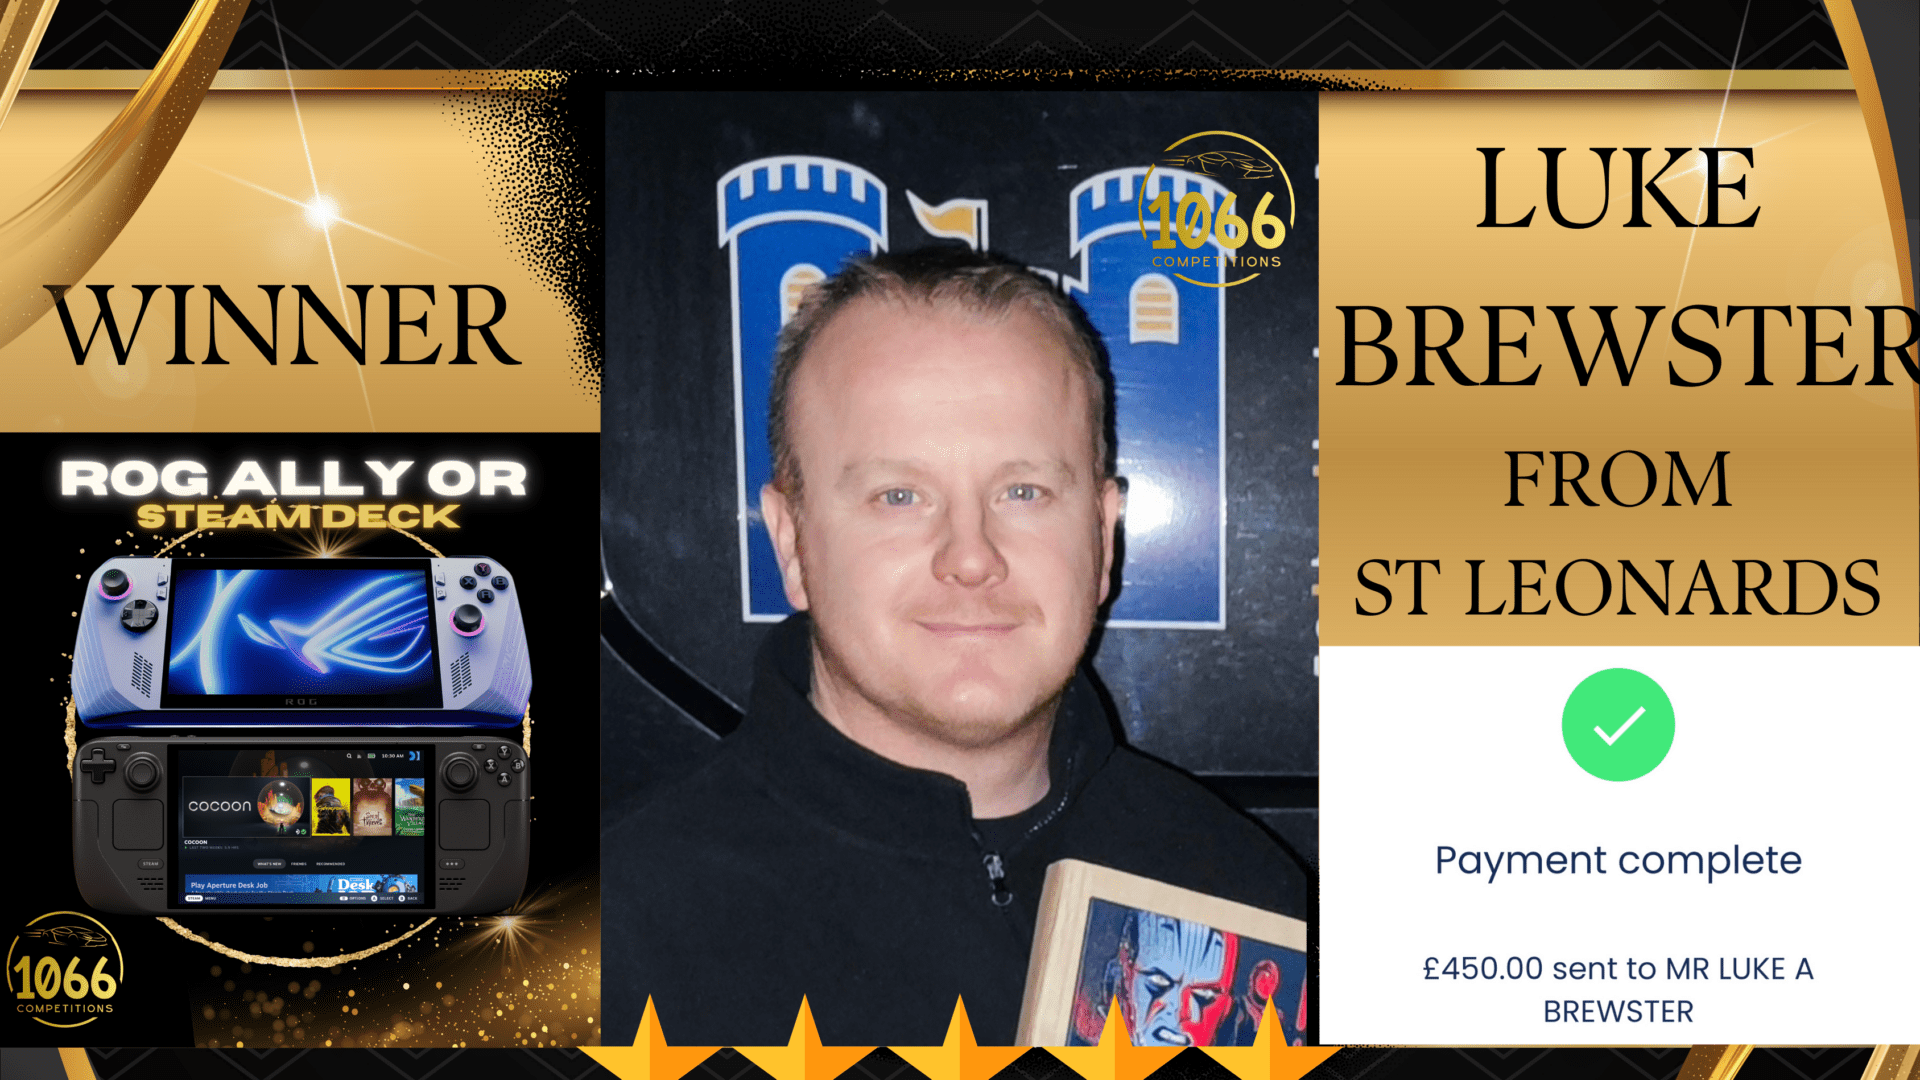 Congratulations to Luke Brewster from Bexhill, winner of Rog Ally or Steam Deck, who opted for £450 cash!